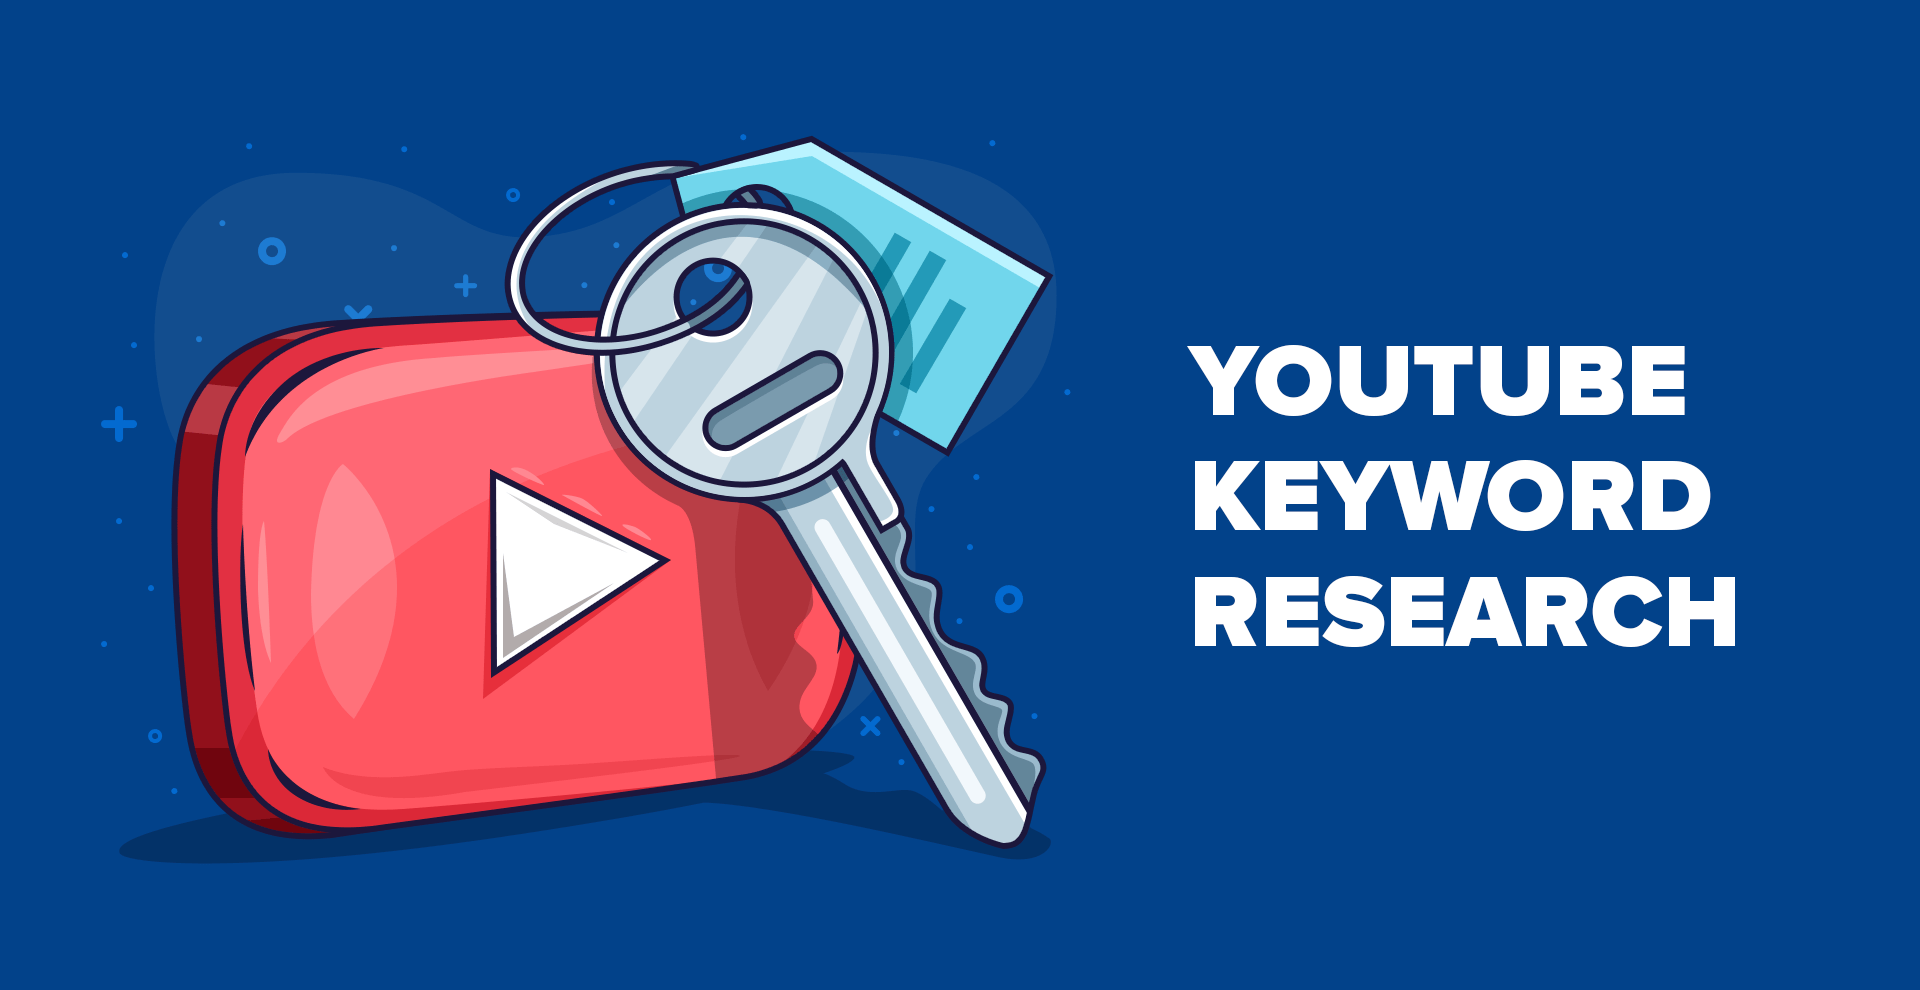 How to Do YouTube Keyword Research in 3 Easy Steps